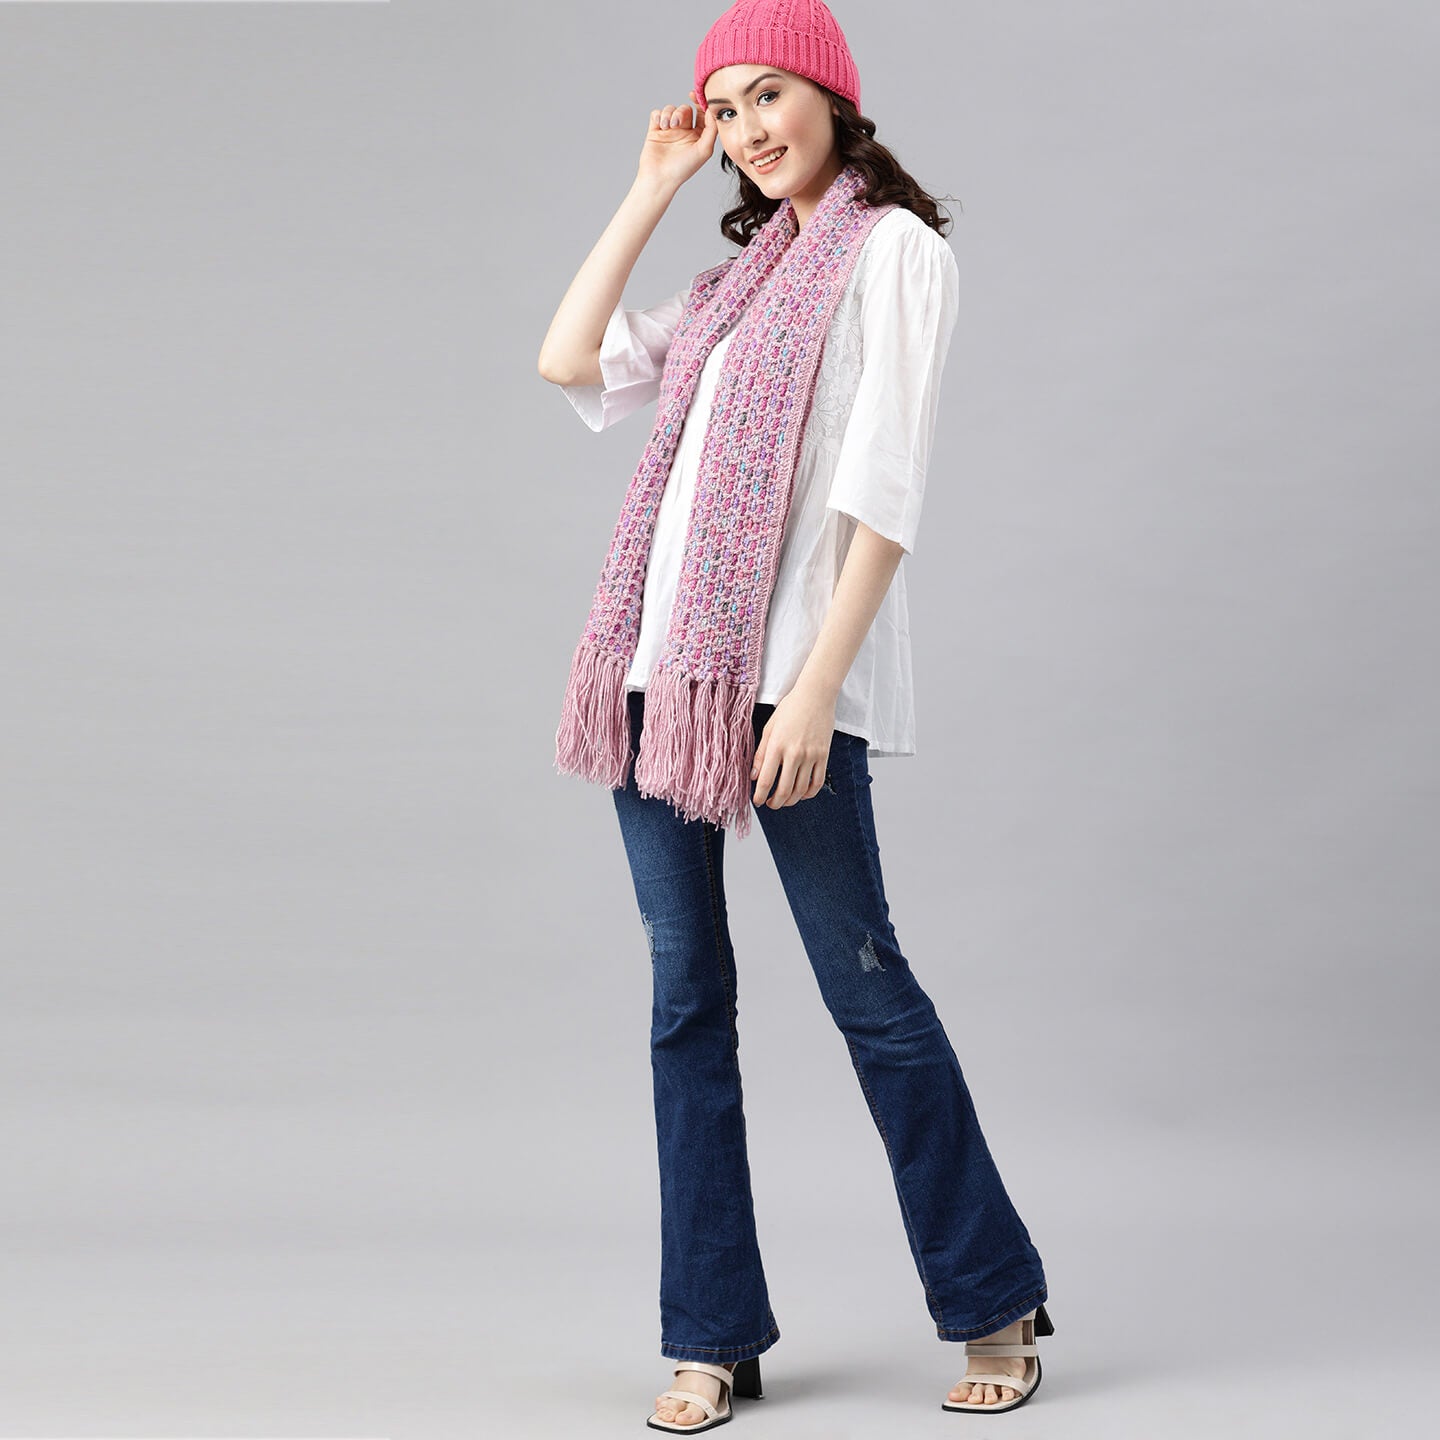 Net and Lace Scarf - Pink 2590